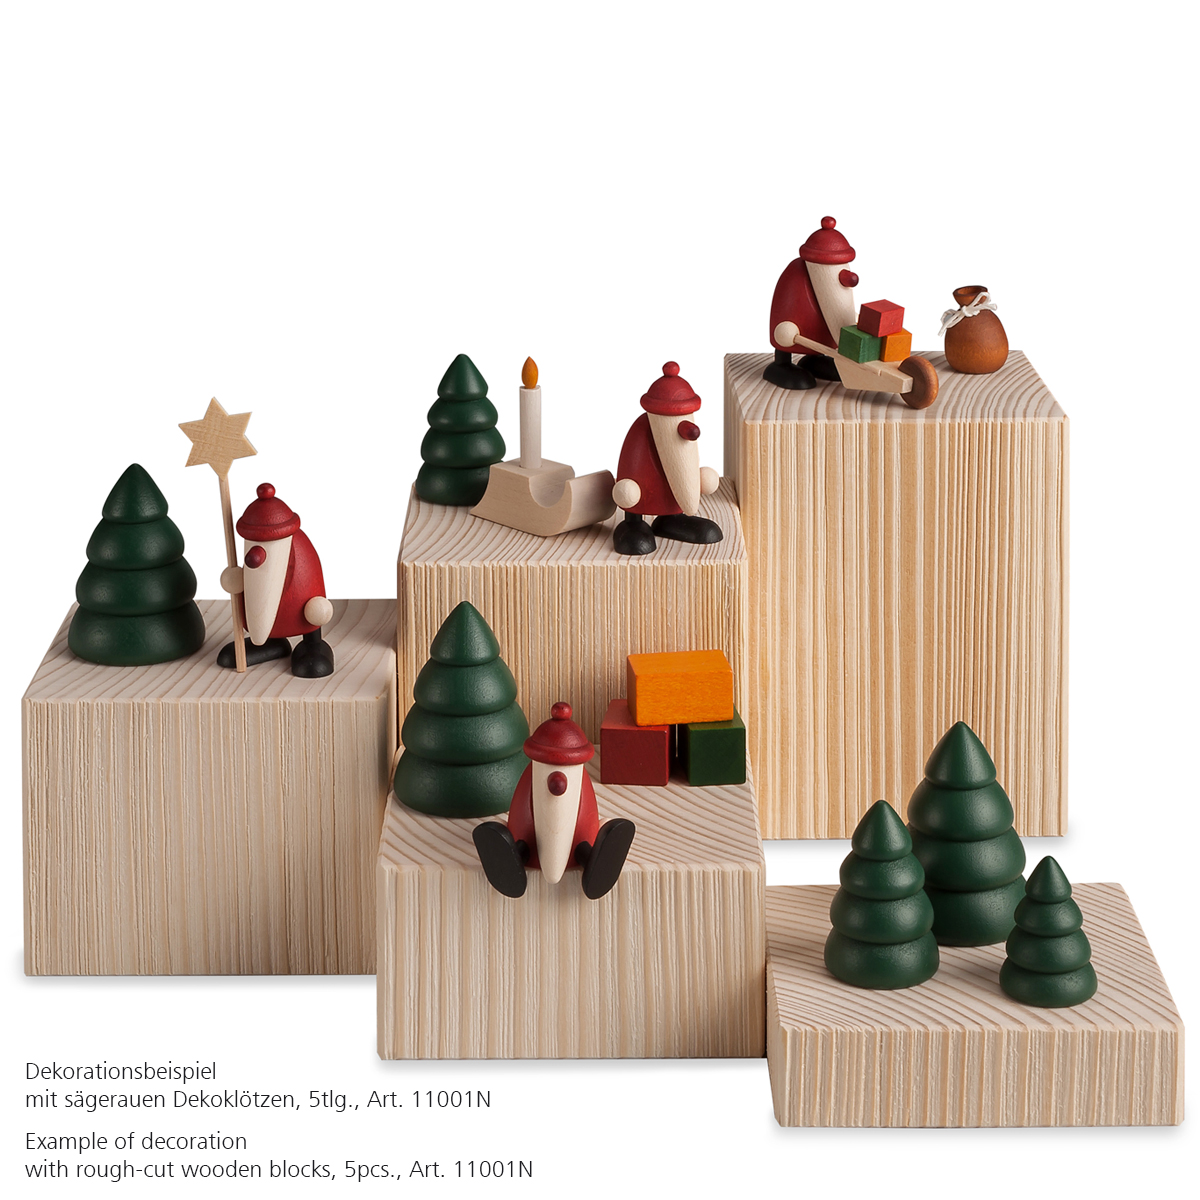 Set 2 | Santa Claus with a sledge and a tree